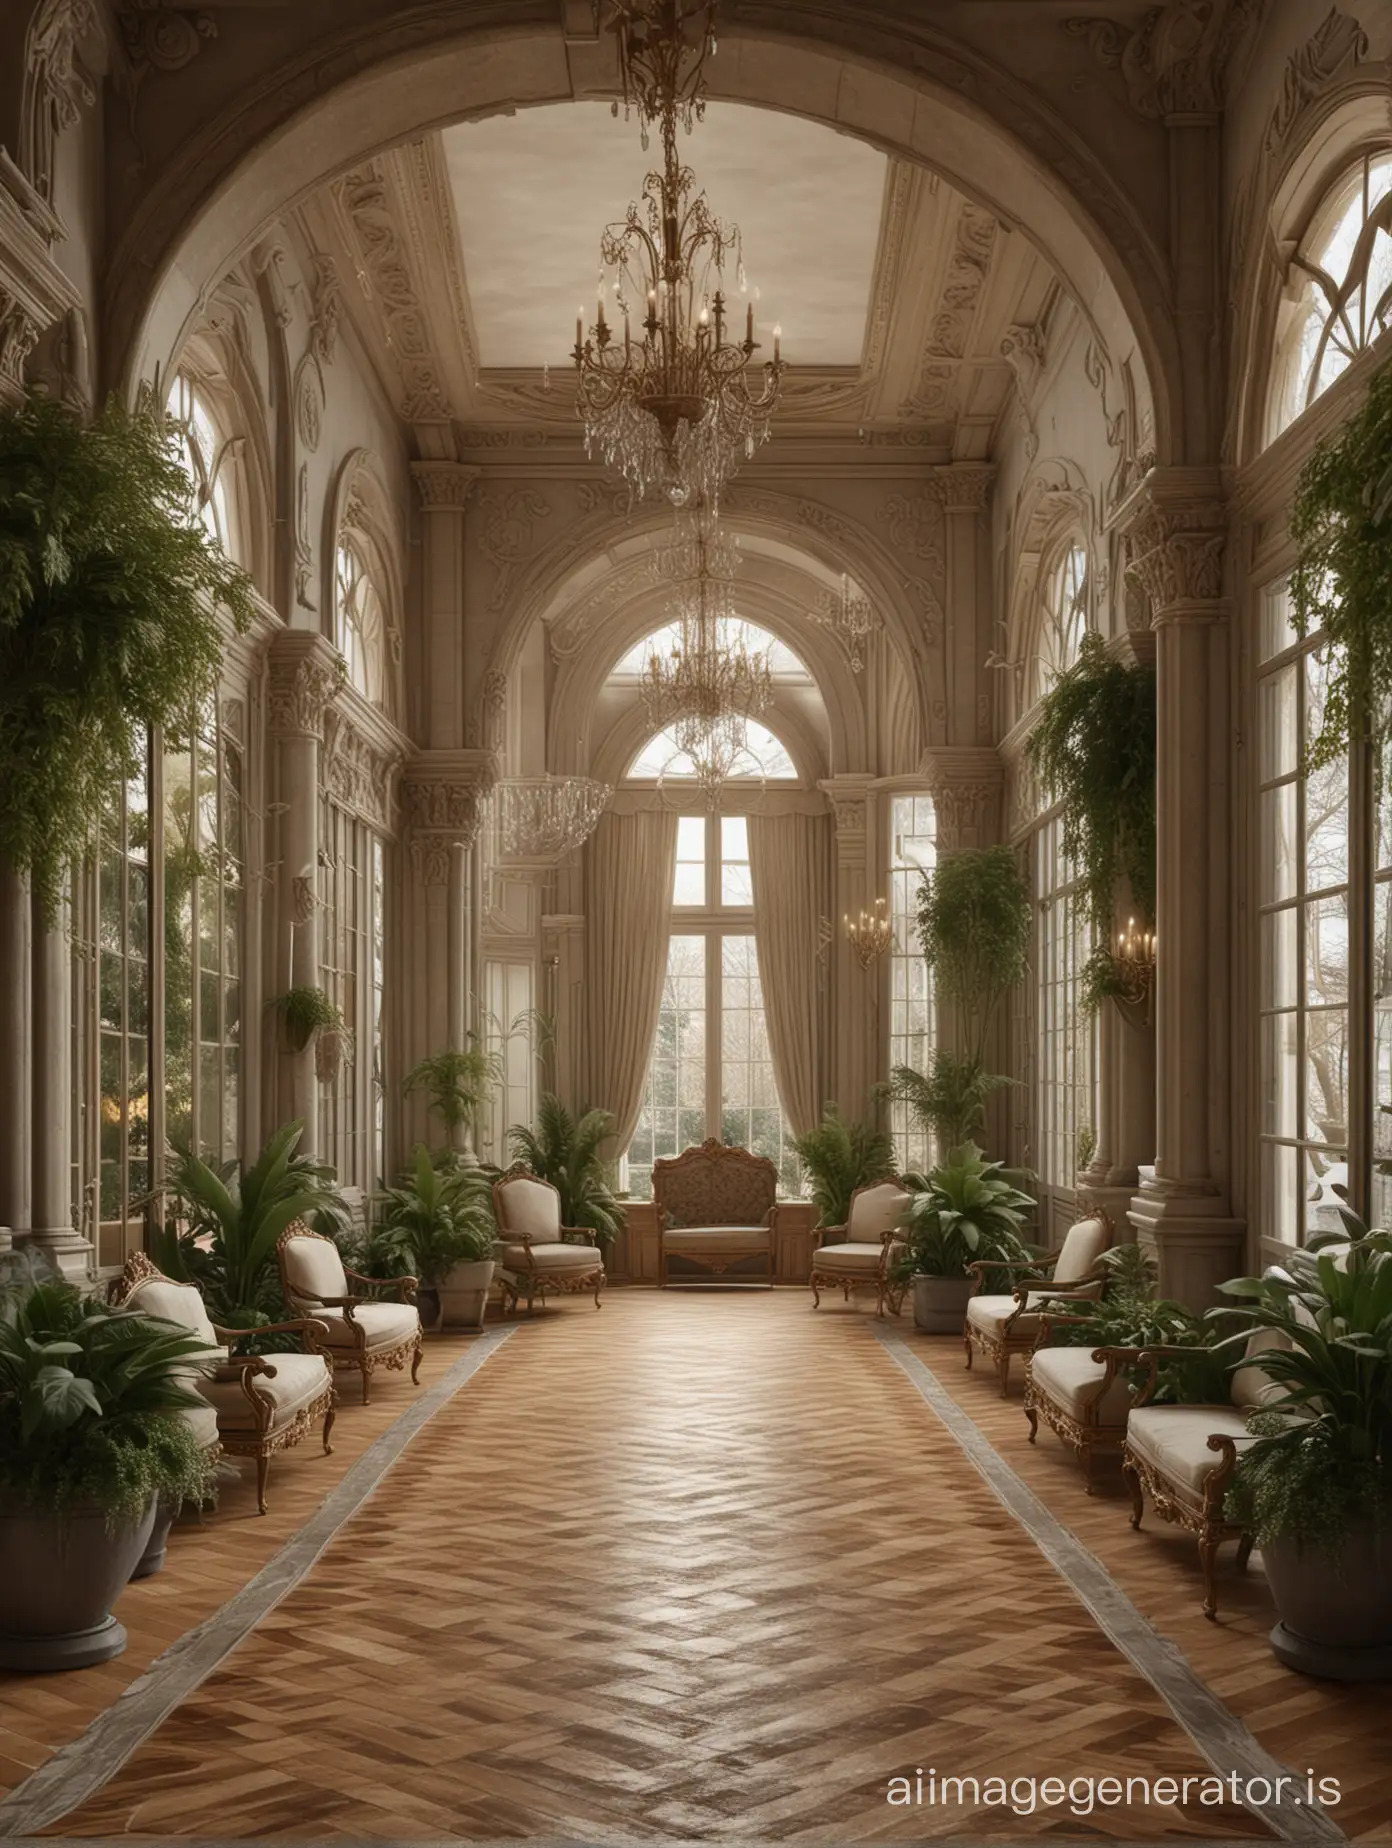 Luxuriant winter garden in a French Empire-style furnished castle, with dimmed light and a photorealistic image.